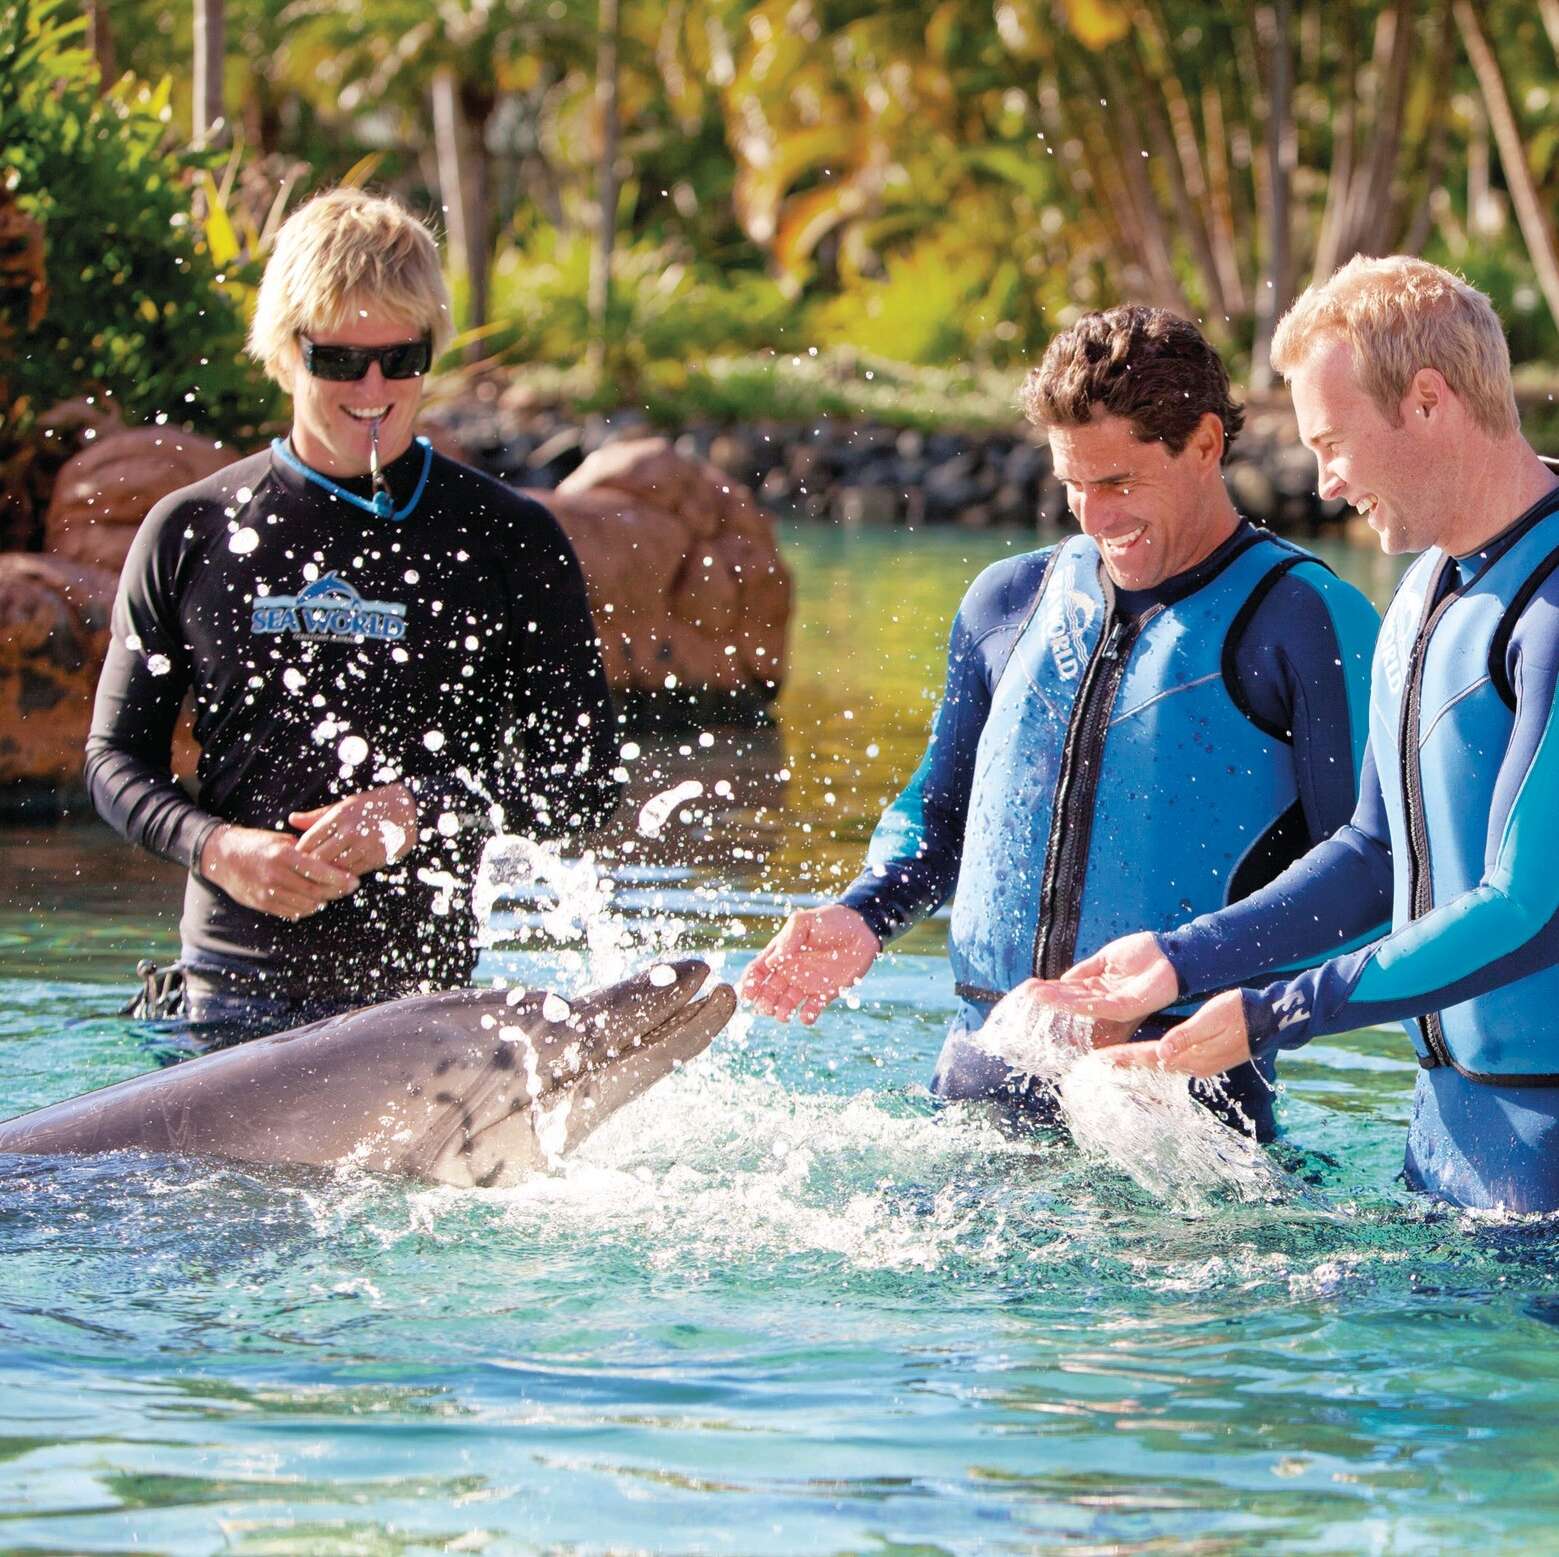 Seaworld Dolphin Cove Theatre, Main Beach, Gold Coast, Queensland ©Tourism and Events Queensland